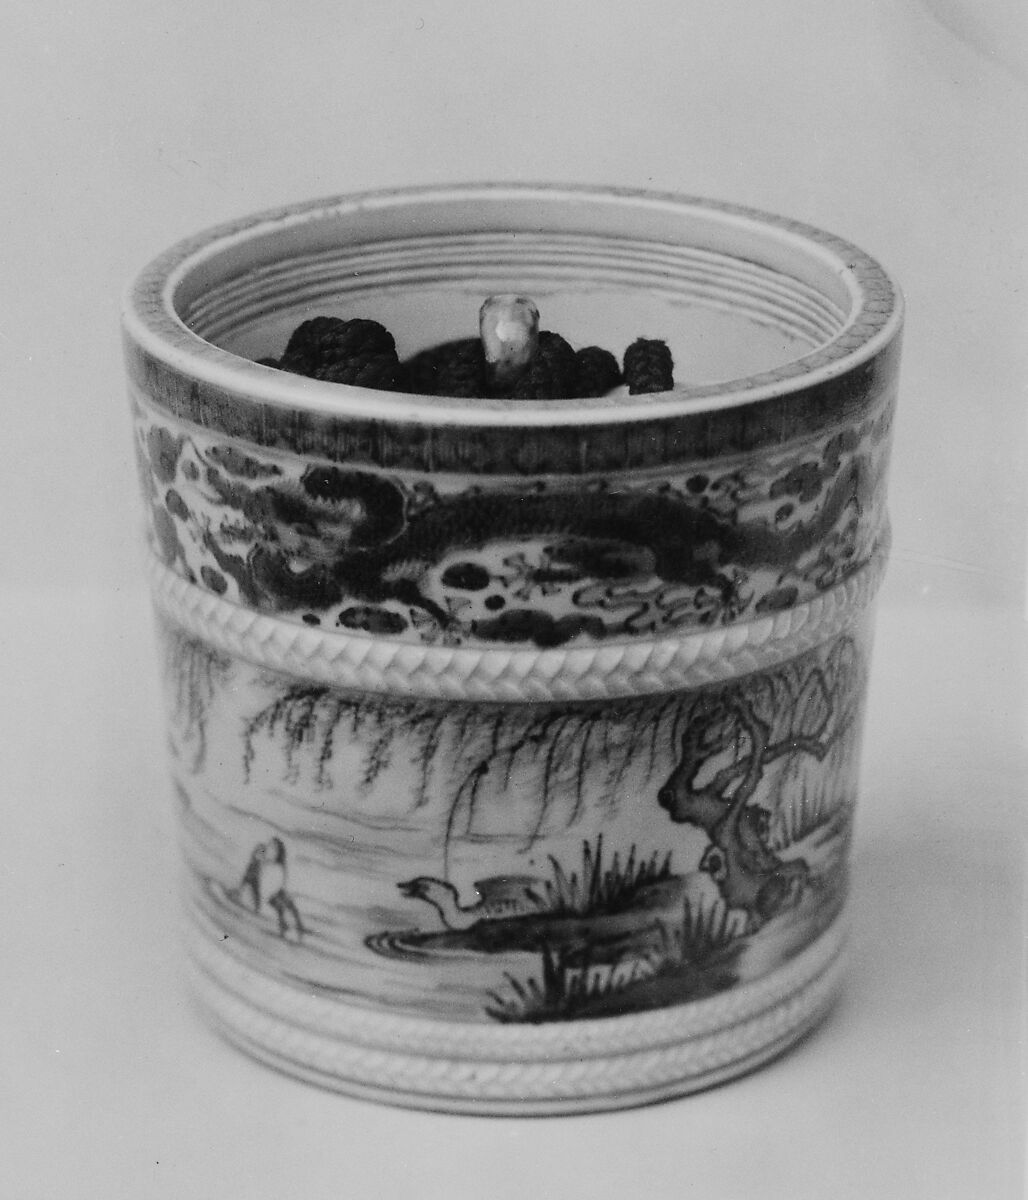 Bucket, Porcelain decorated in blue (Koto ware), Japan 